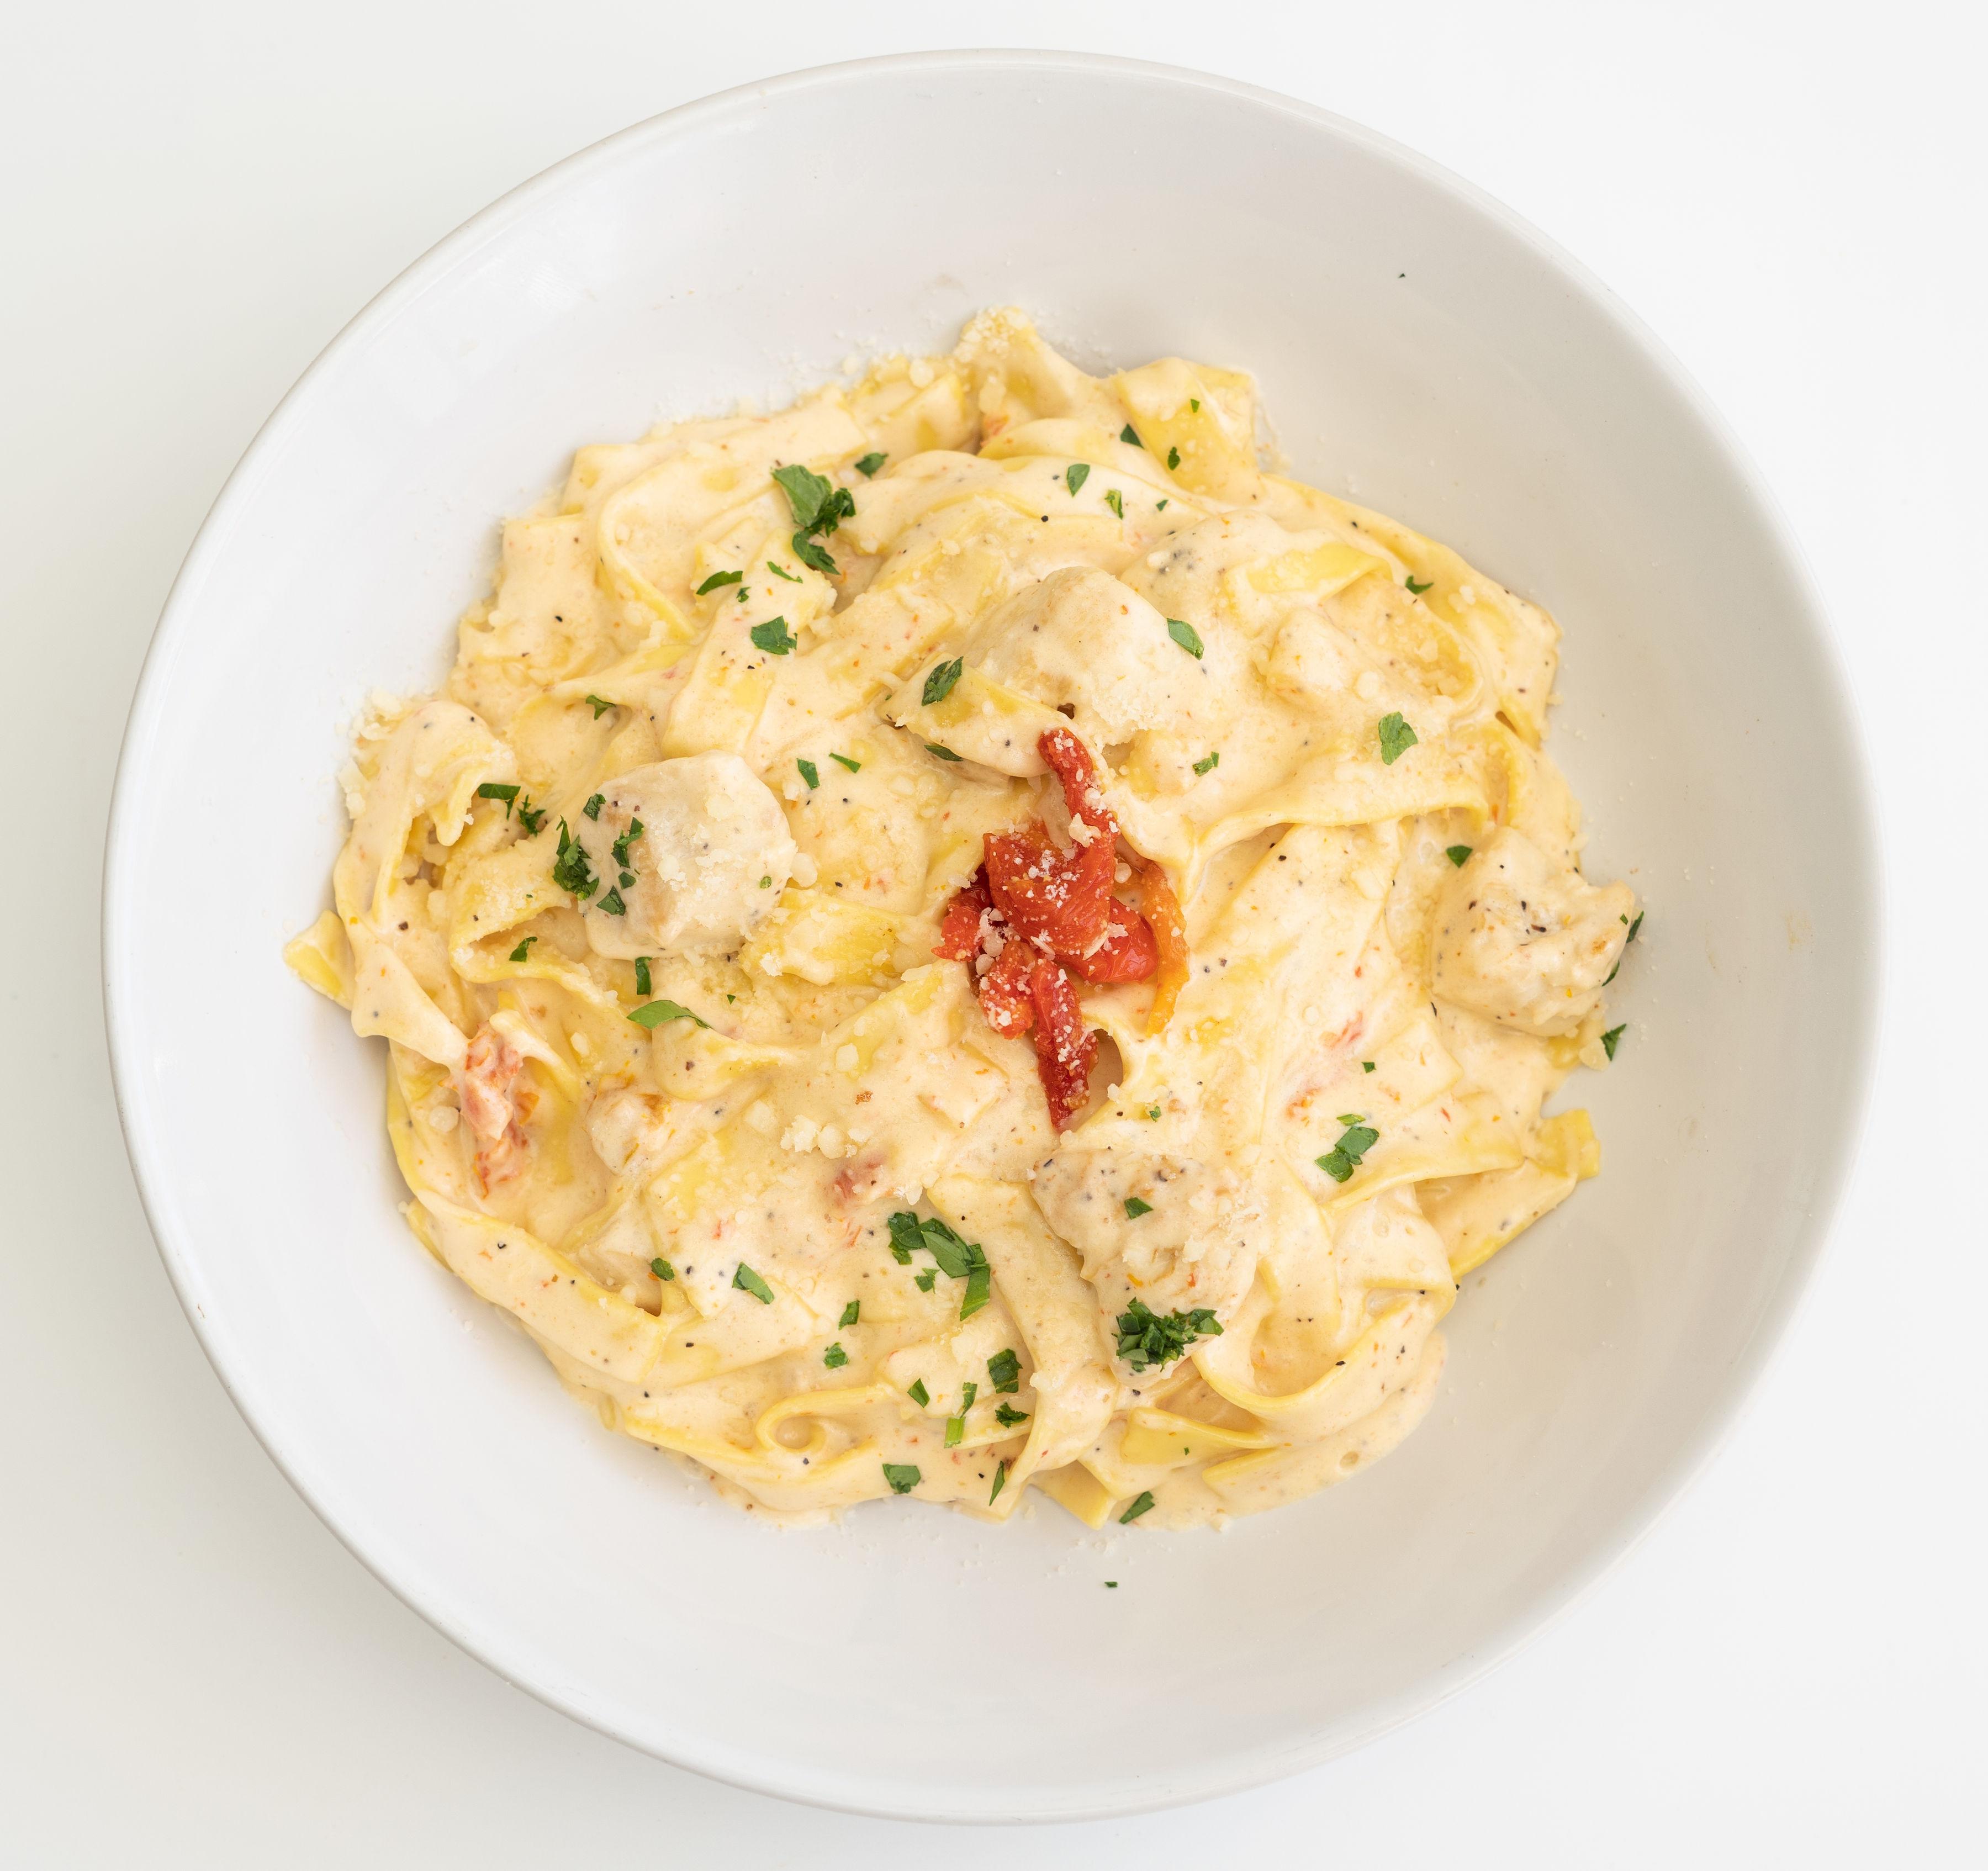 FETTUCCINE WITH CHICKEN AND SUNDRIED TOMATOES